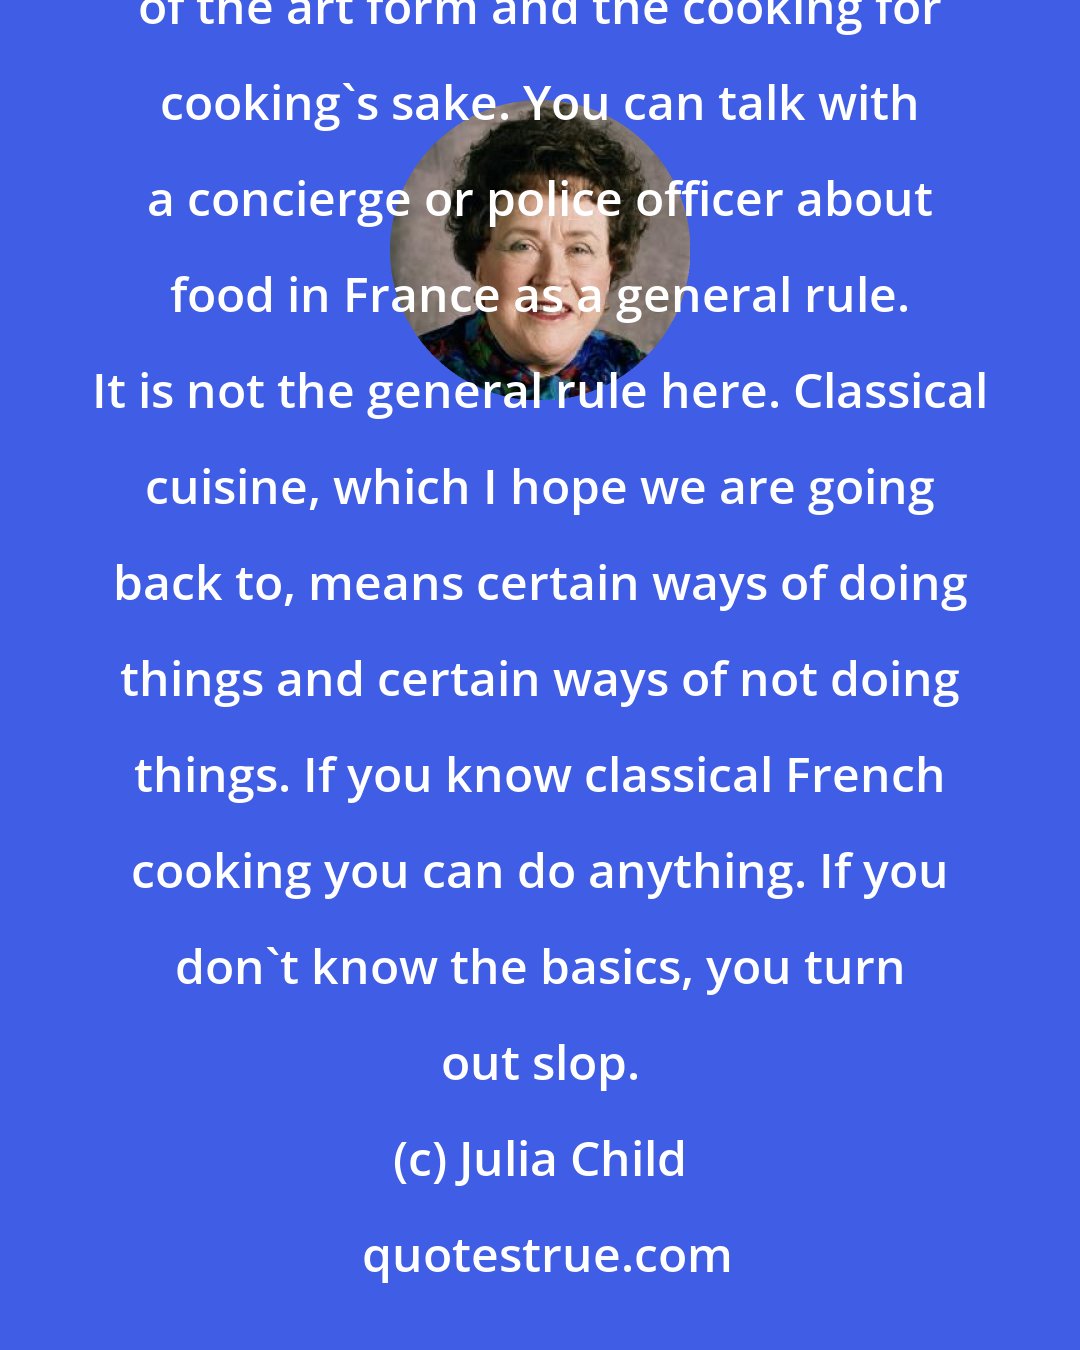 Julia Child: In France cooking is a serious art form and a national sport. I think the French enjoy the complication of the art form and the cooking for cooking's sake. You can talk with a concierge or police officer about food in France as a general rule. It is not the general rule here. Classical cuisine, which I hope we are going back to, means certain ways of doing things and certain ways of not doing things. If you know classical French cooking you can do anything. If you don't know the basics, you turn out slop.